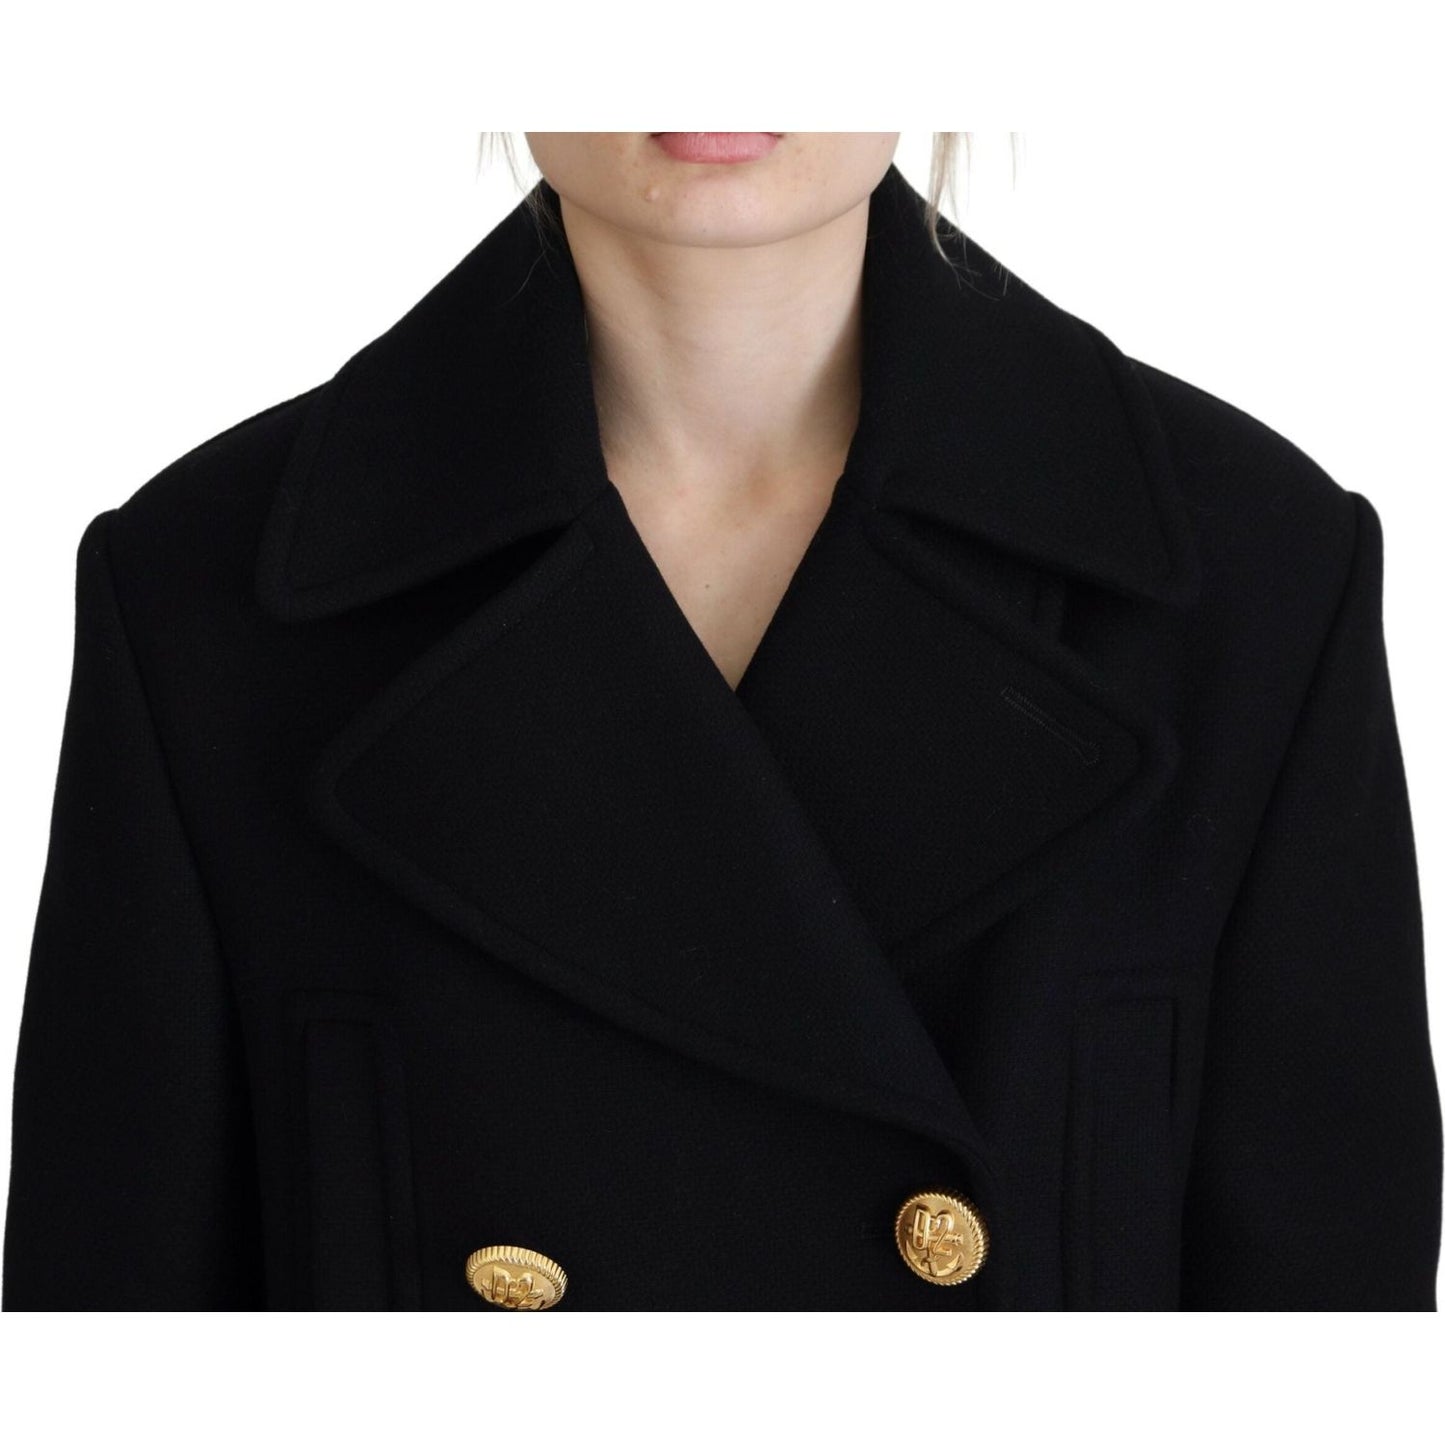 Dsquared² Black Double Breasted Coat Blazer Jacket black-double-breasted-coat-blazer-jacket-2